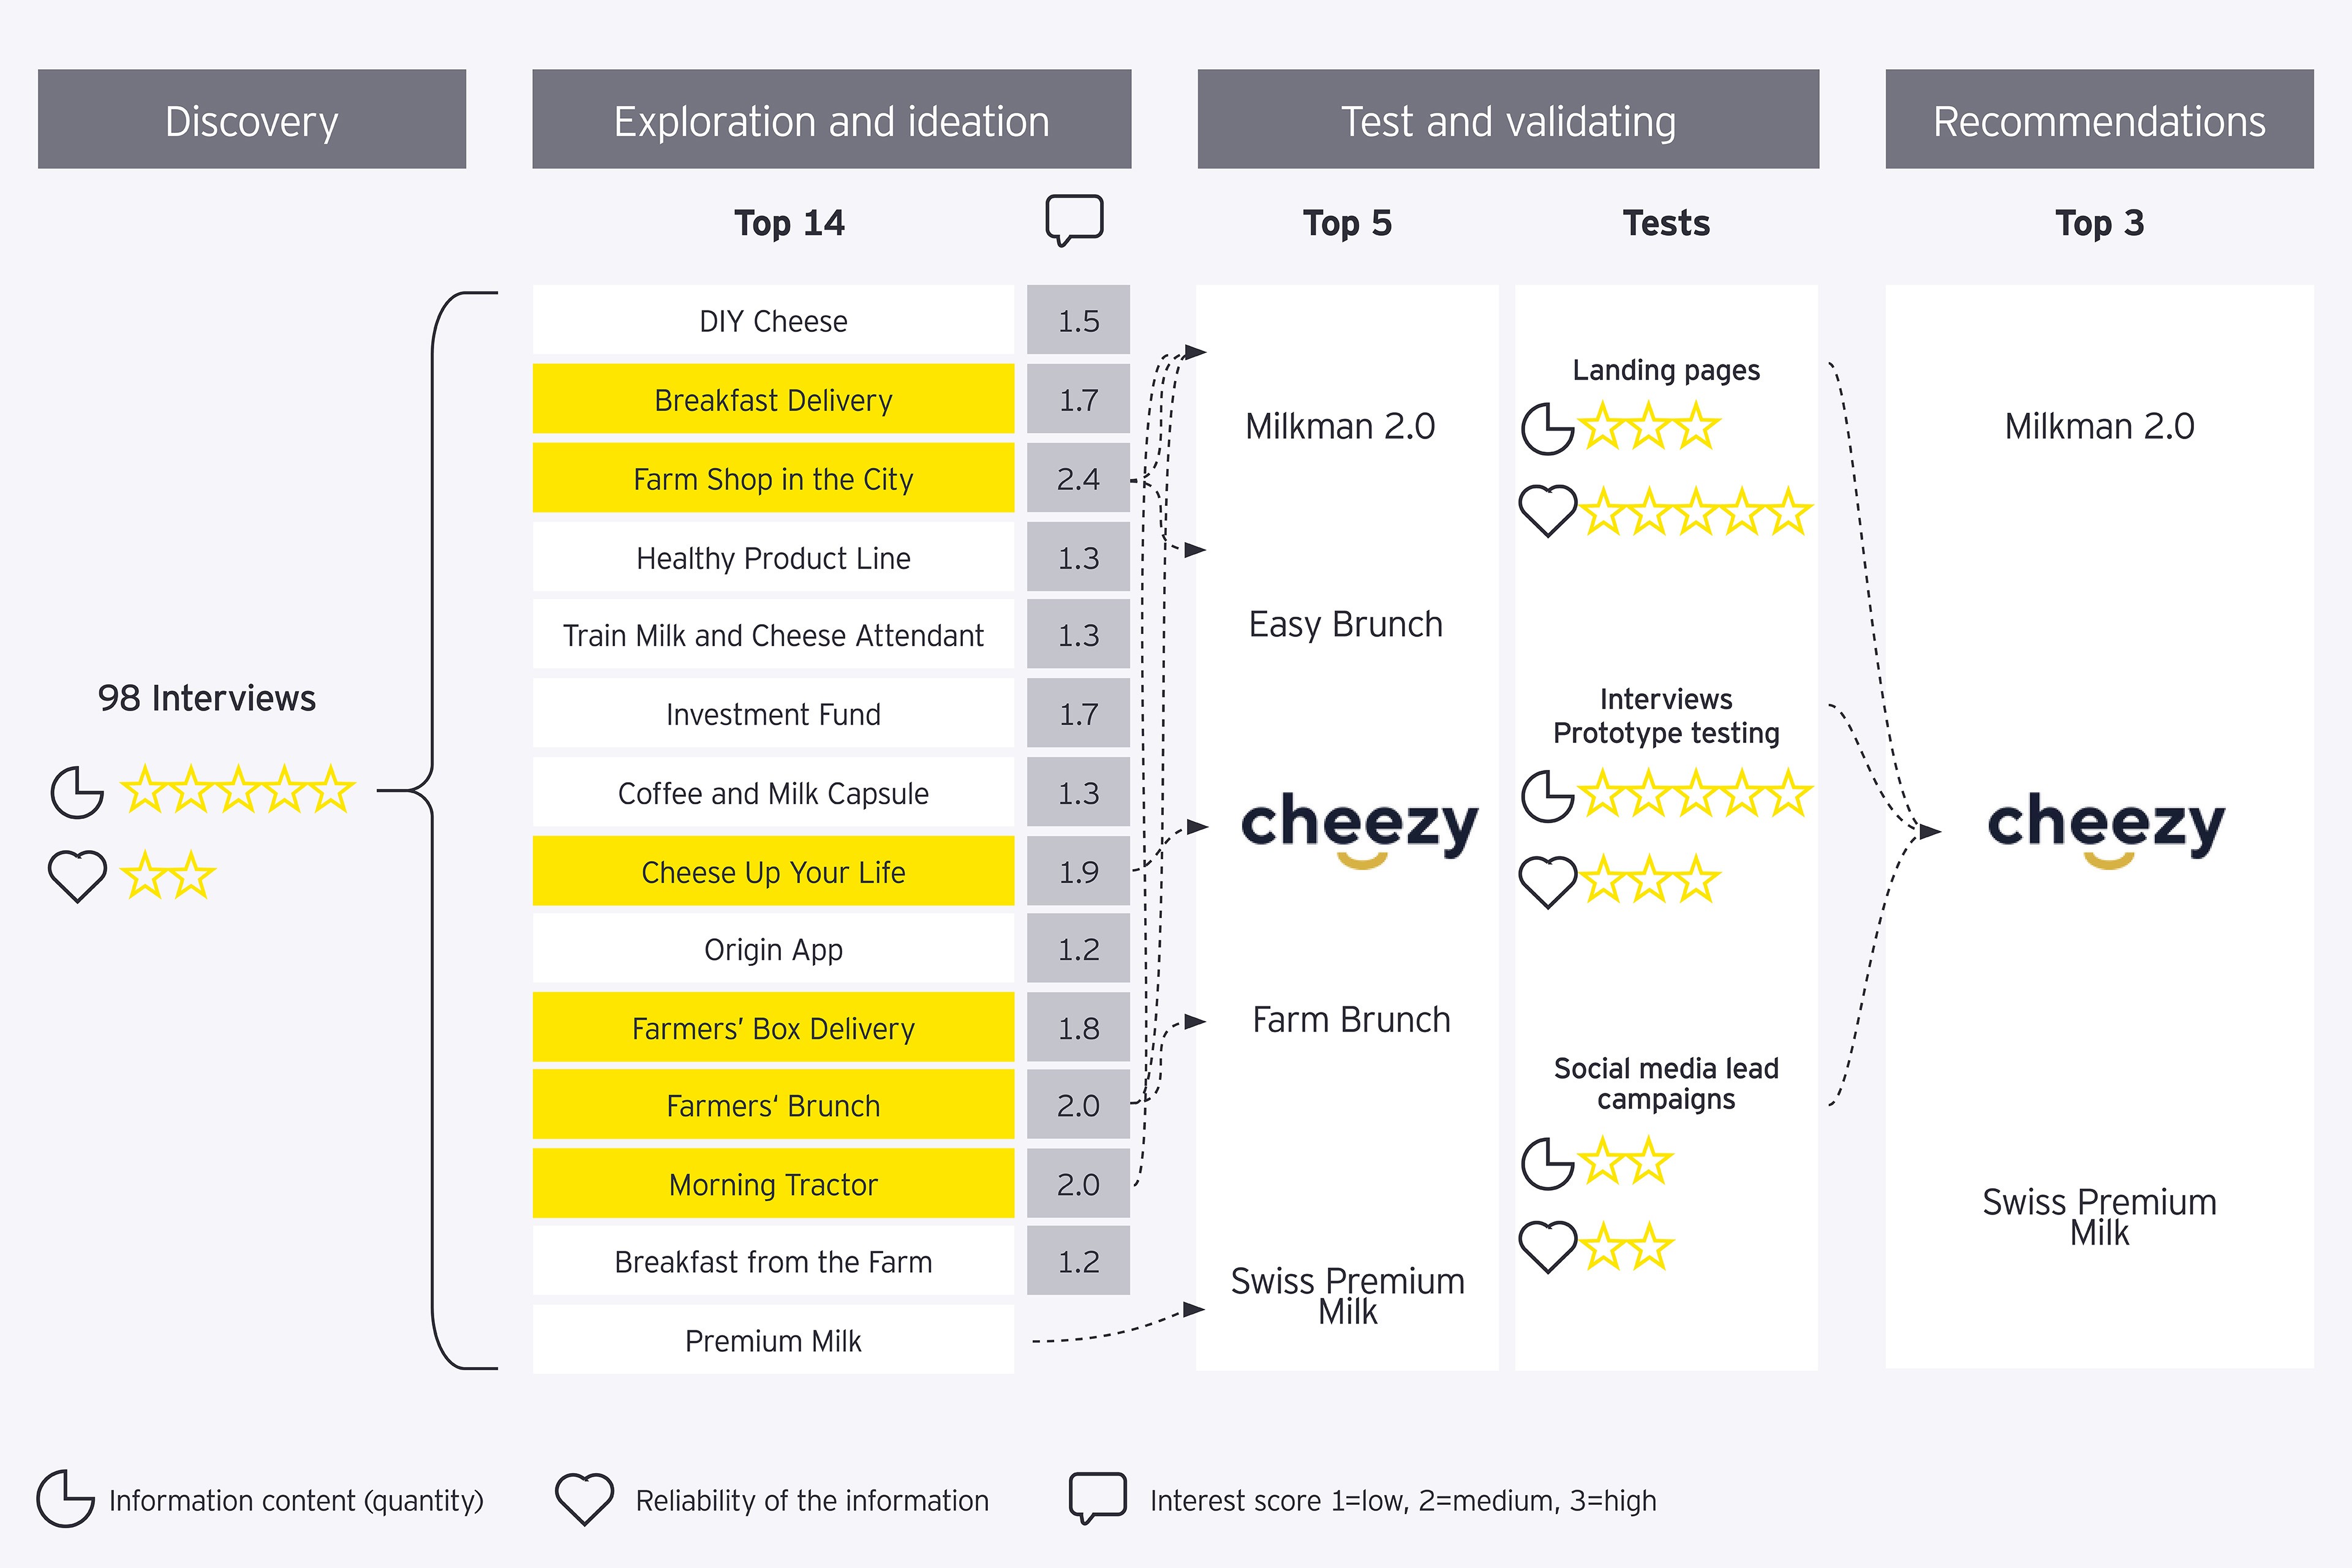 EY’s research and testing process